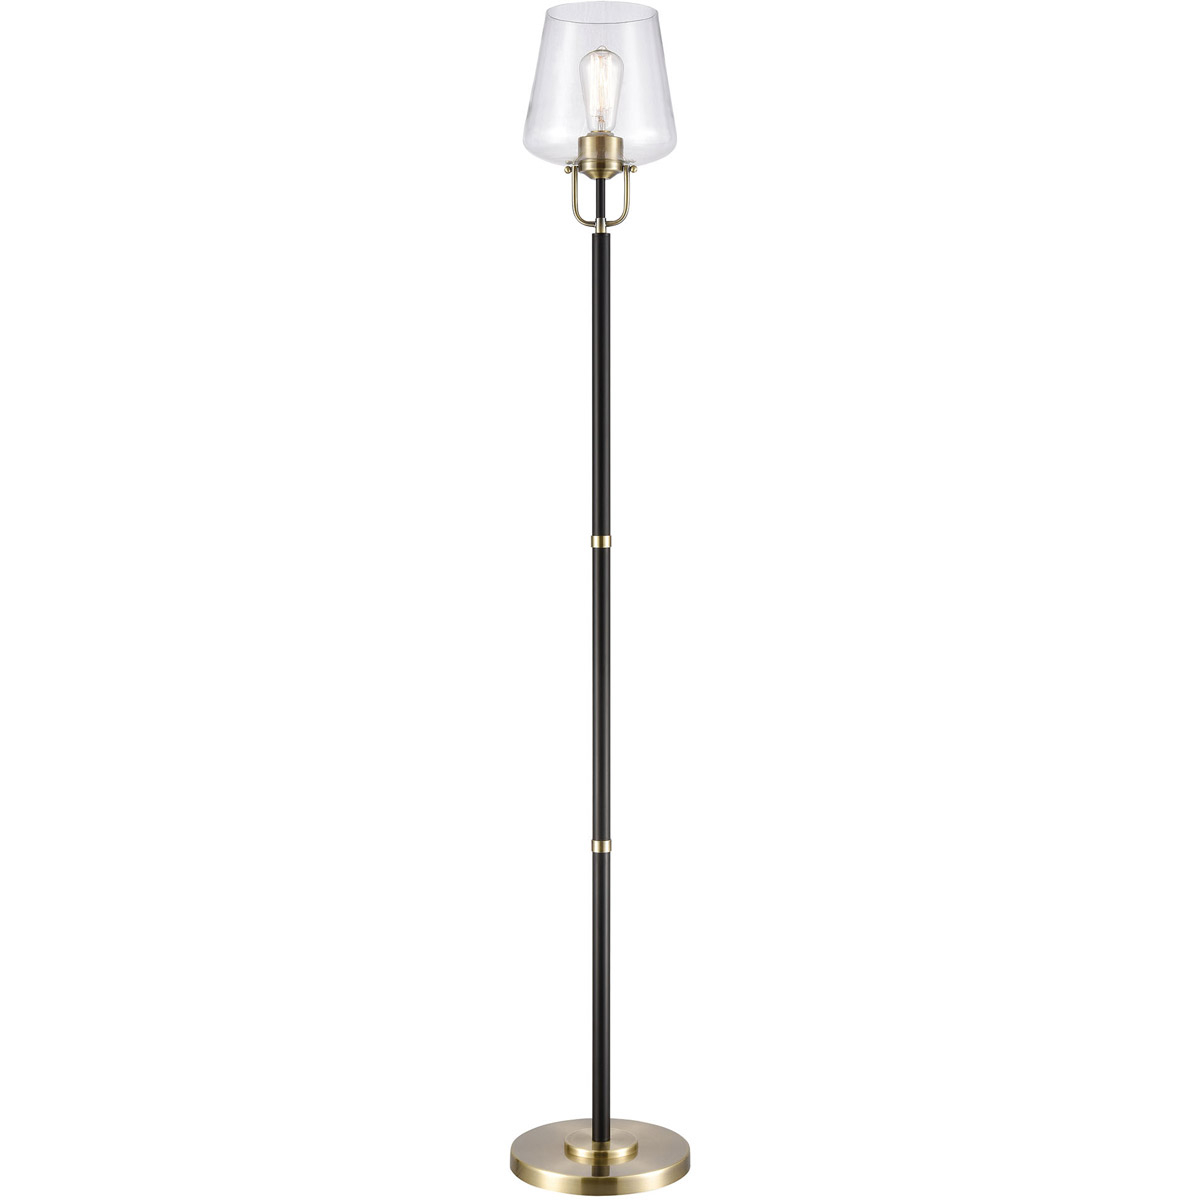 Details About Stein World 77117 Sisterton Floor Lamp Black With Antique Brass in proportions 1200 X 1200